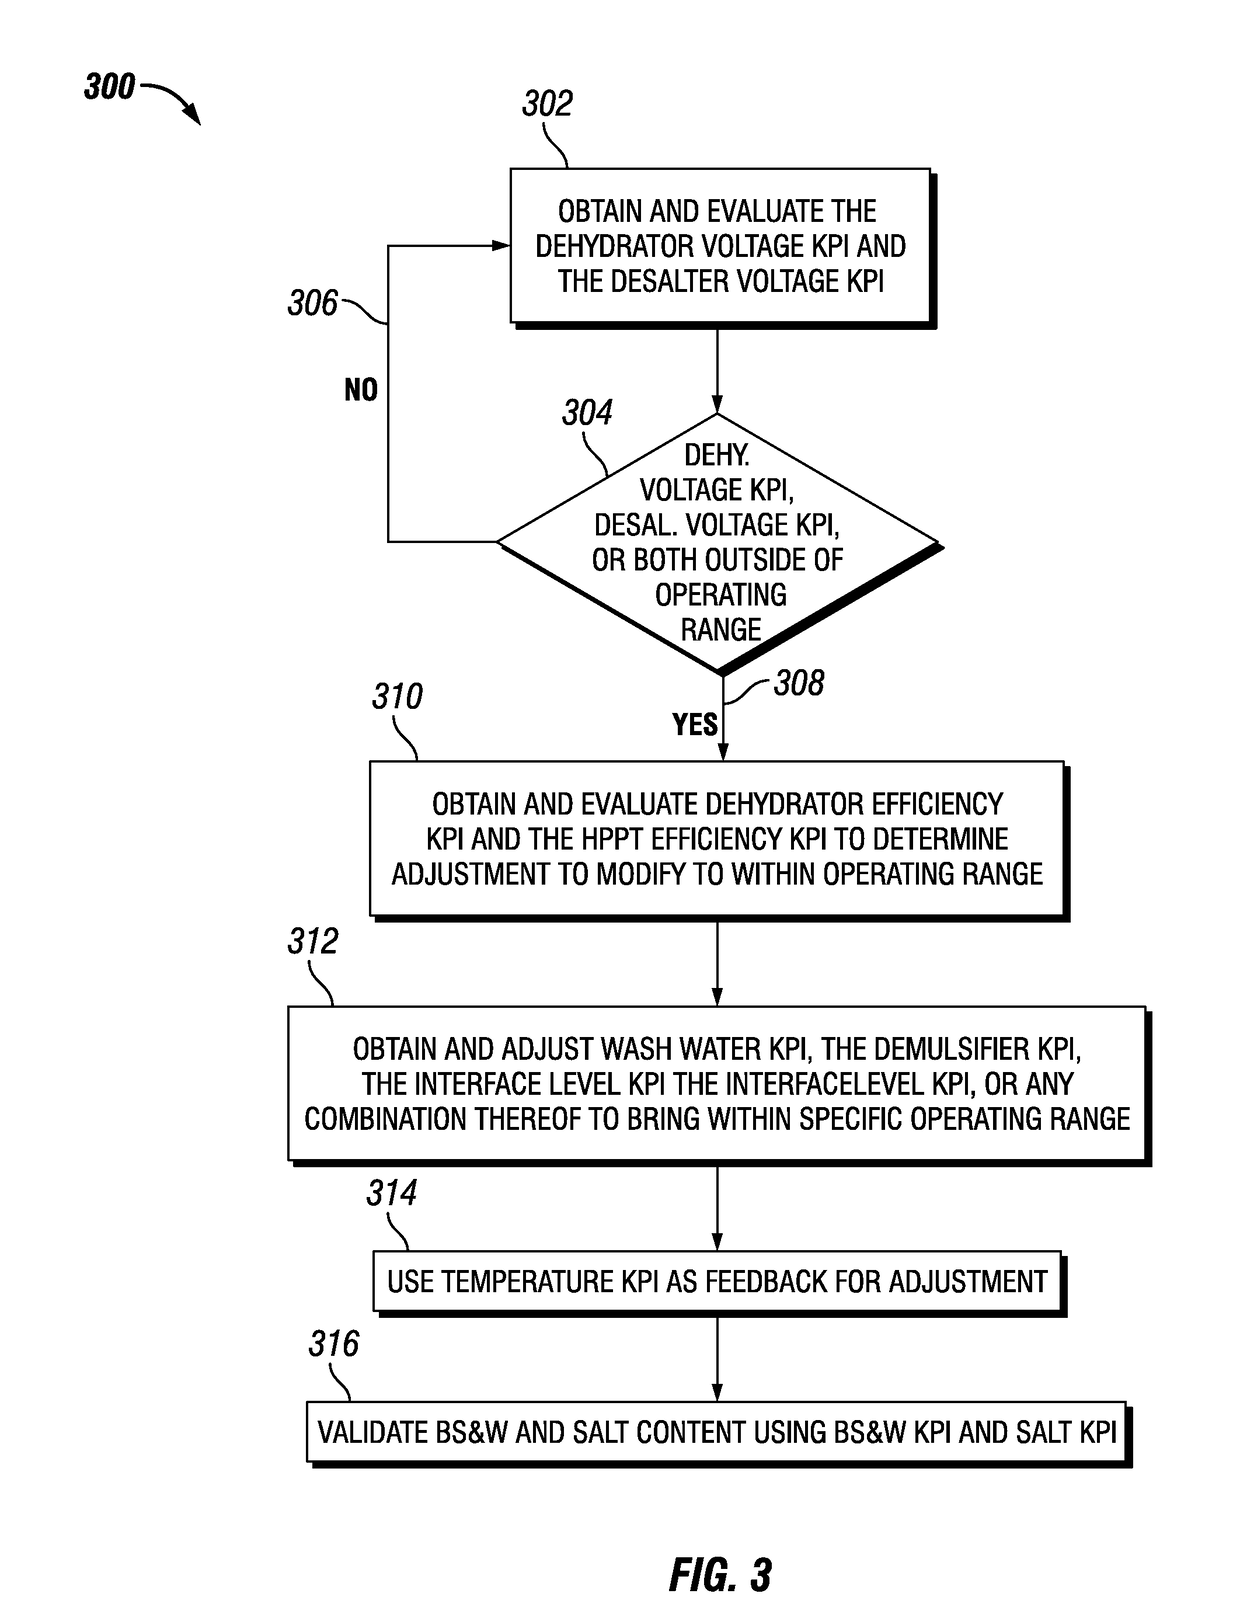 Methods and Systems for Proactively Monitoring Crude Quality Assurance